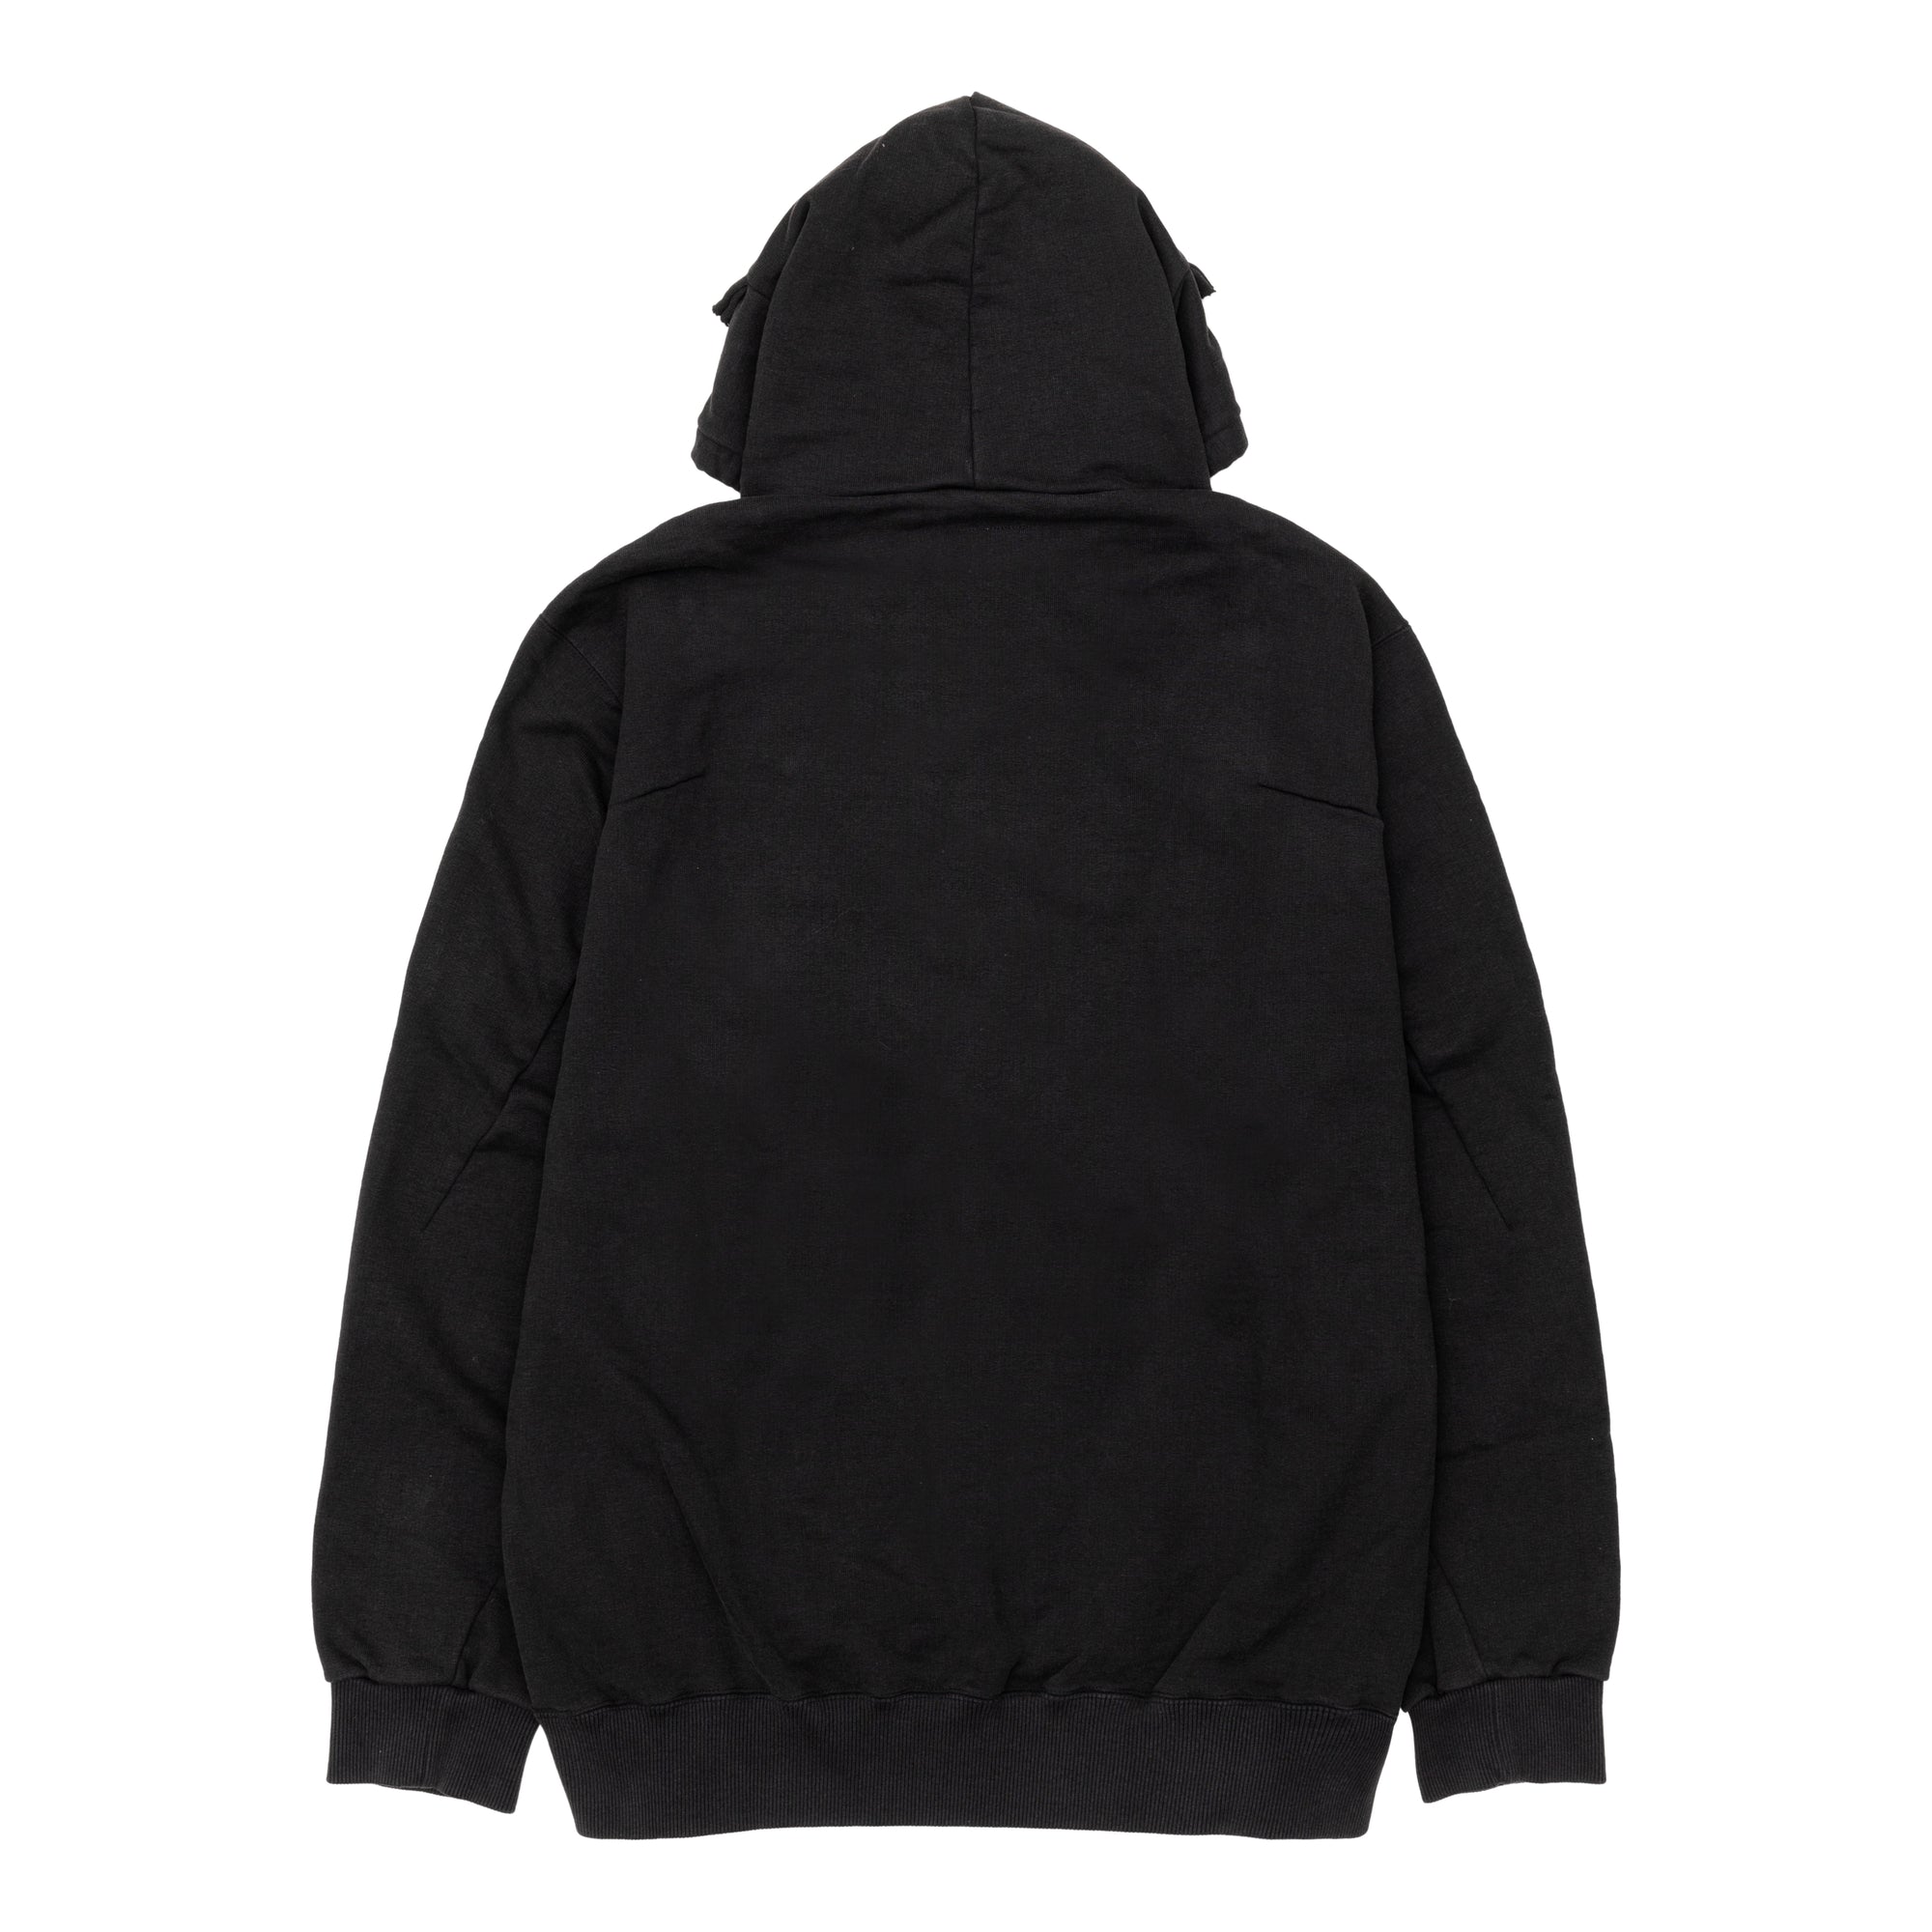 DOUBLET - "Doubland" Embroidery Hoodie - (Black) view 2